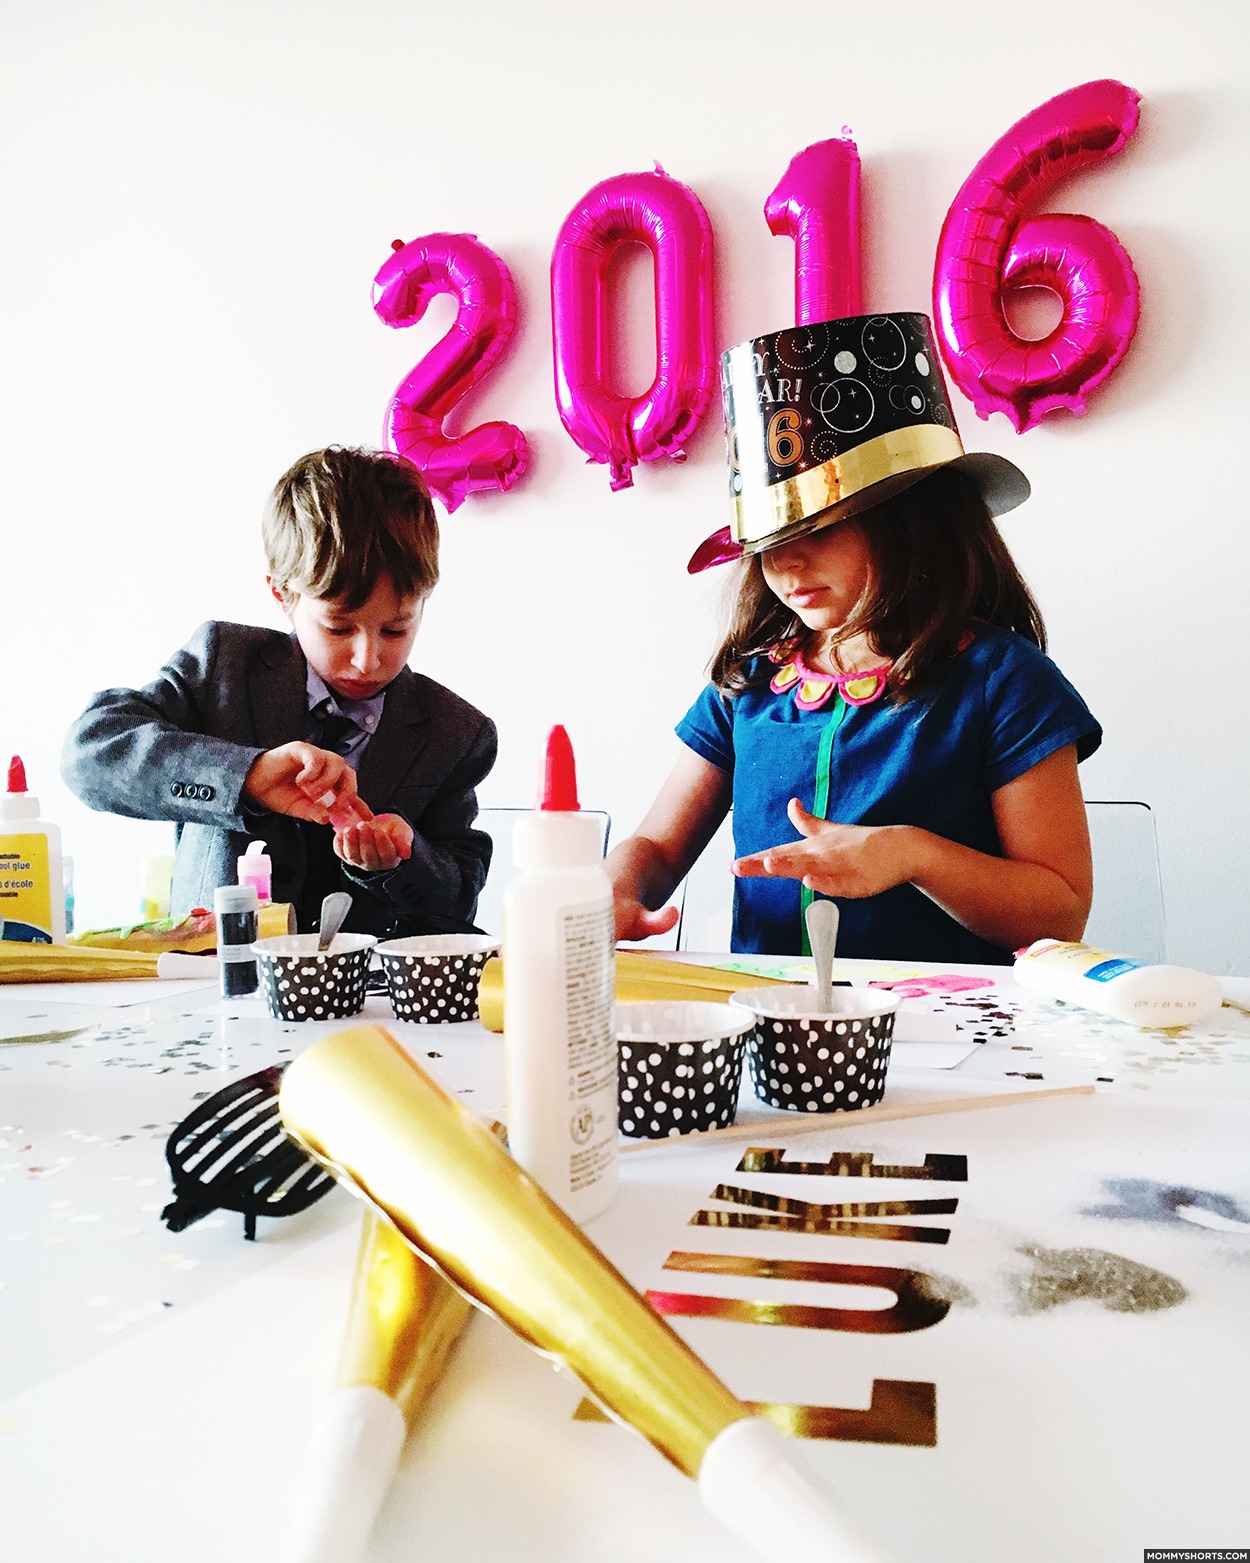 Spending New Years Eve with kids and need some New Years Eve party ideas? Click through for everything from decor to crafts!